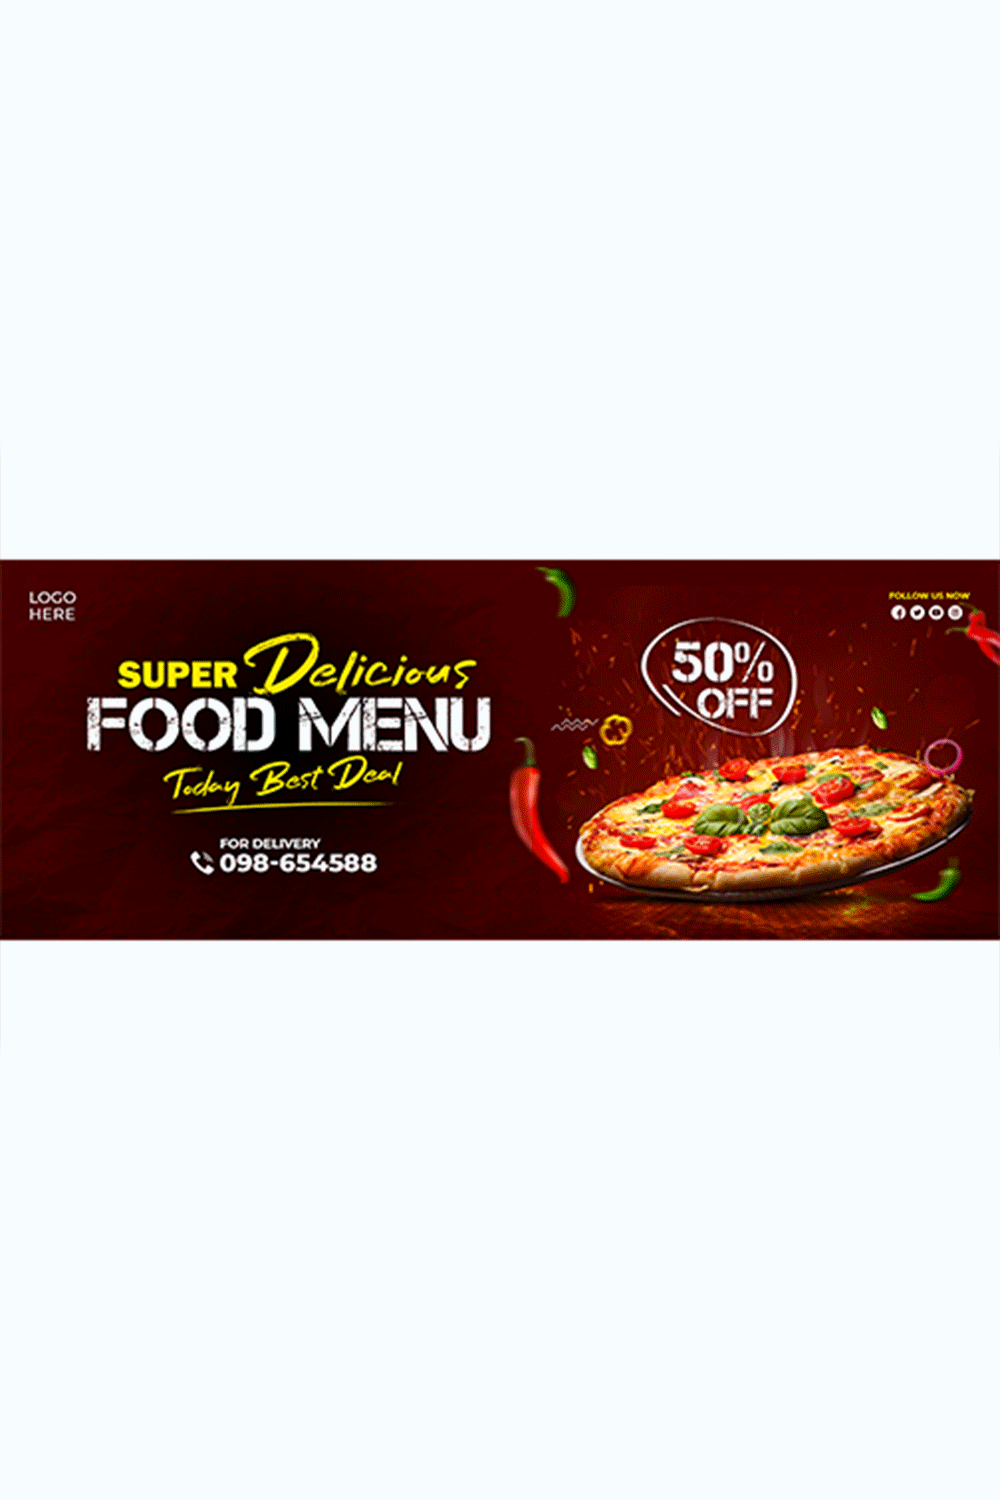 Food menu and restaurant facebook cover template pinterest preview image.